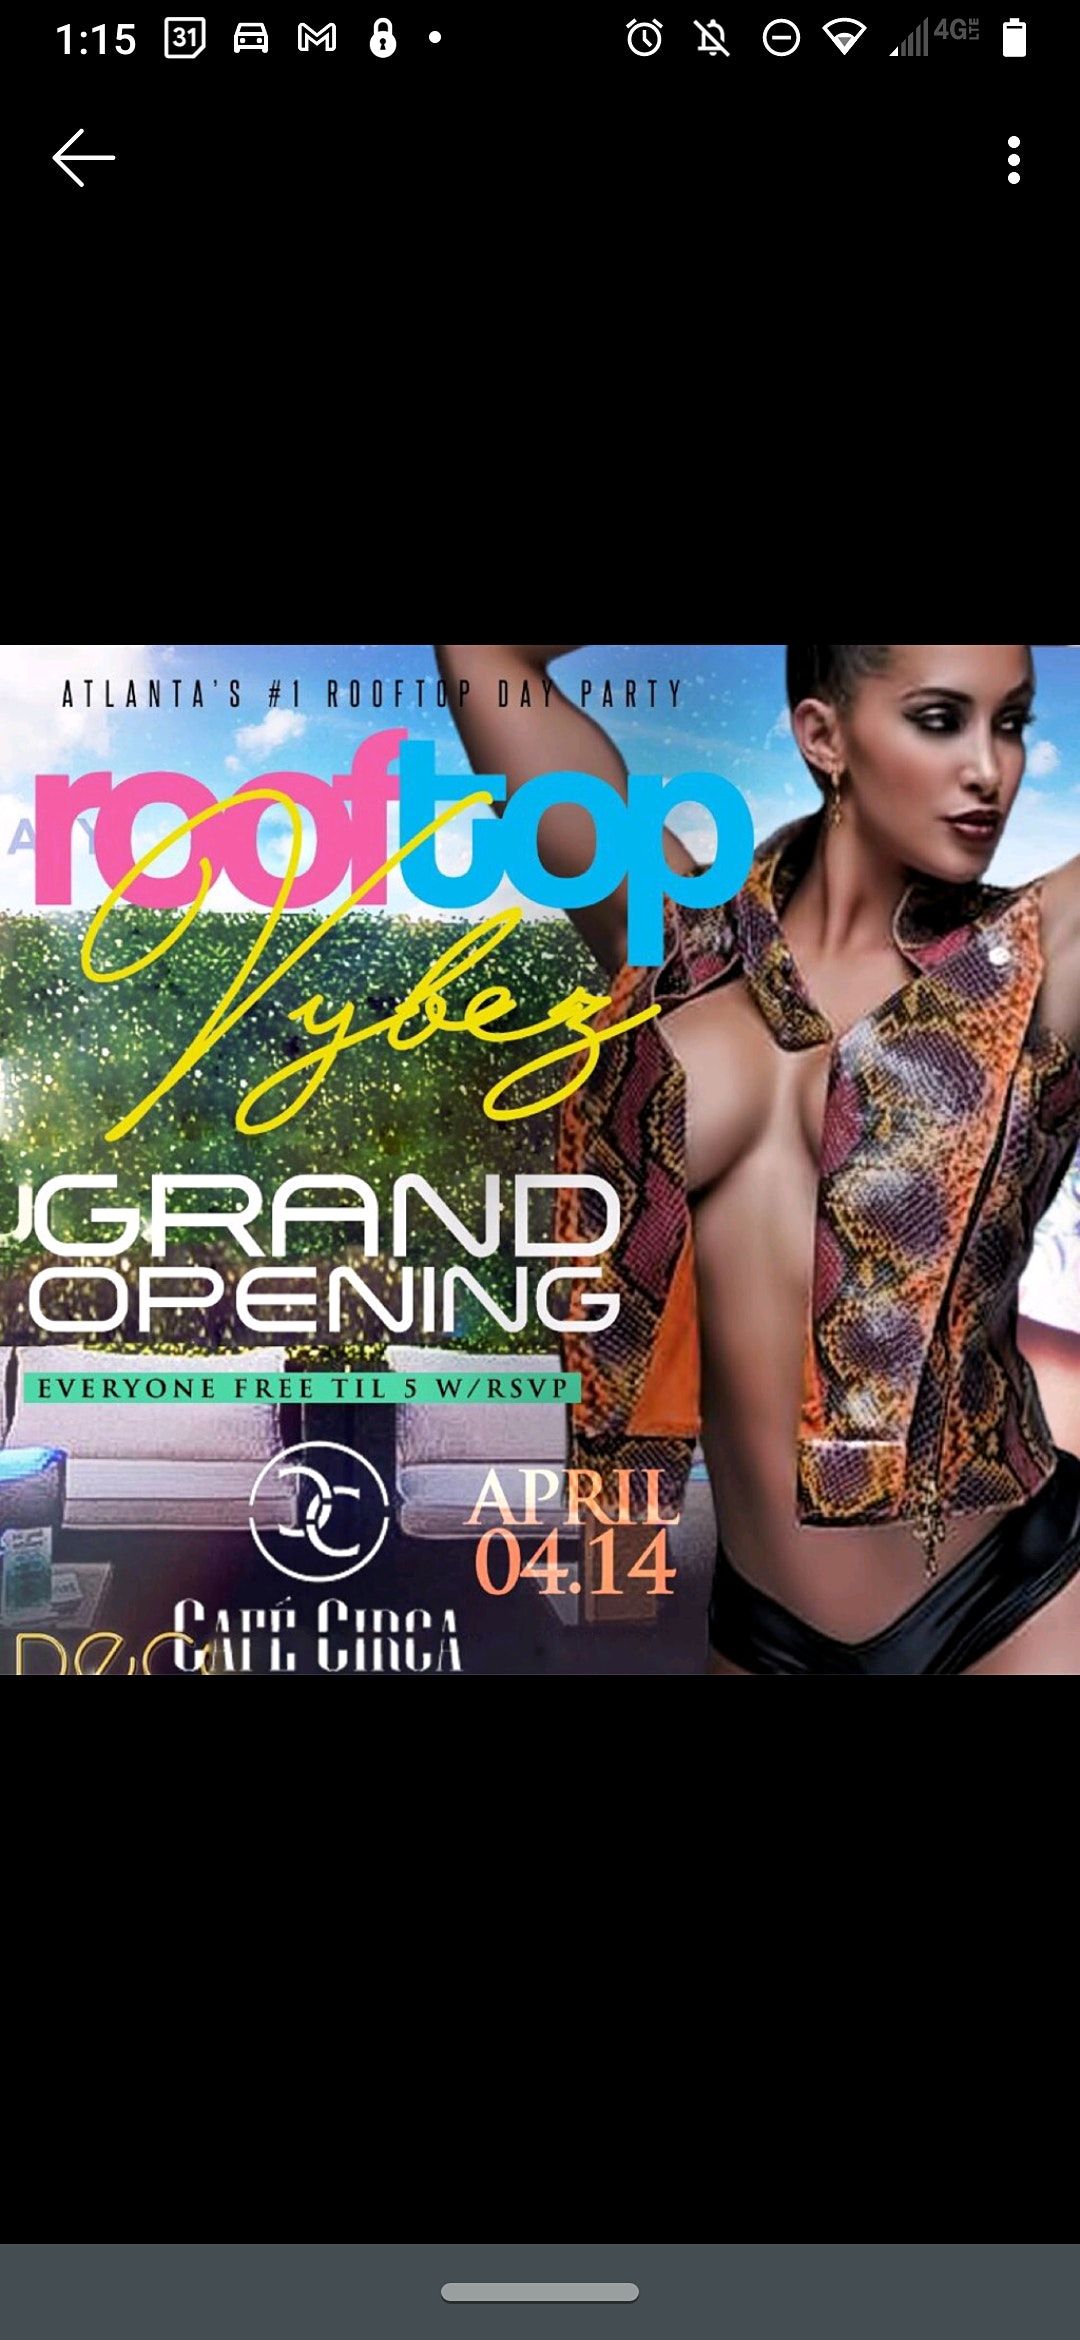 ATL'S #1 ROOFTOP DAY PARTY! Saturday @ Cafe Circa! RSVP NOW!